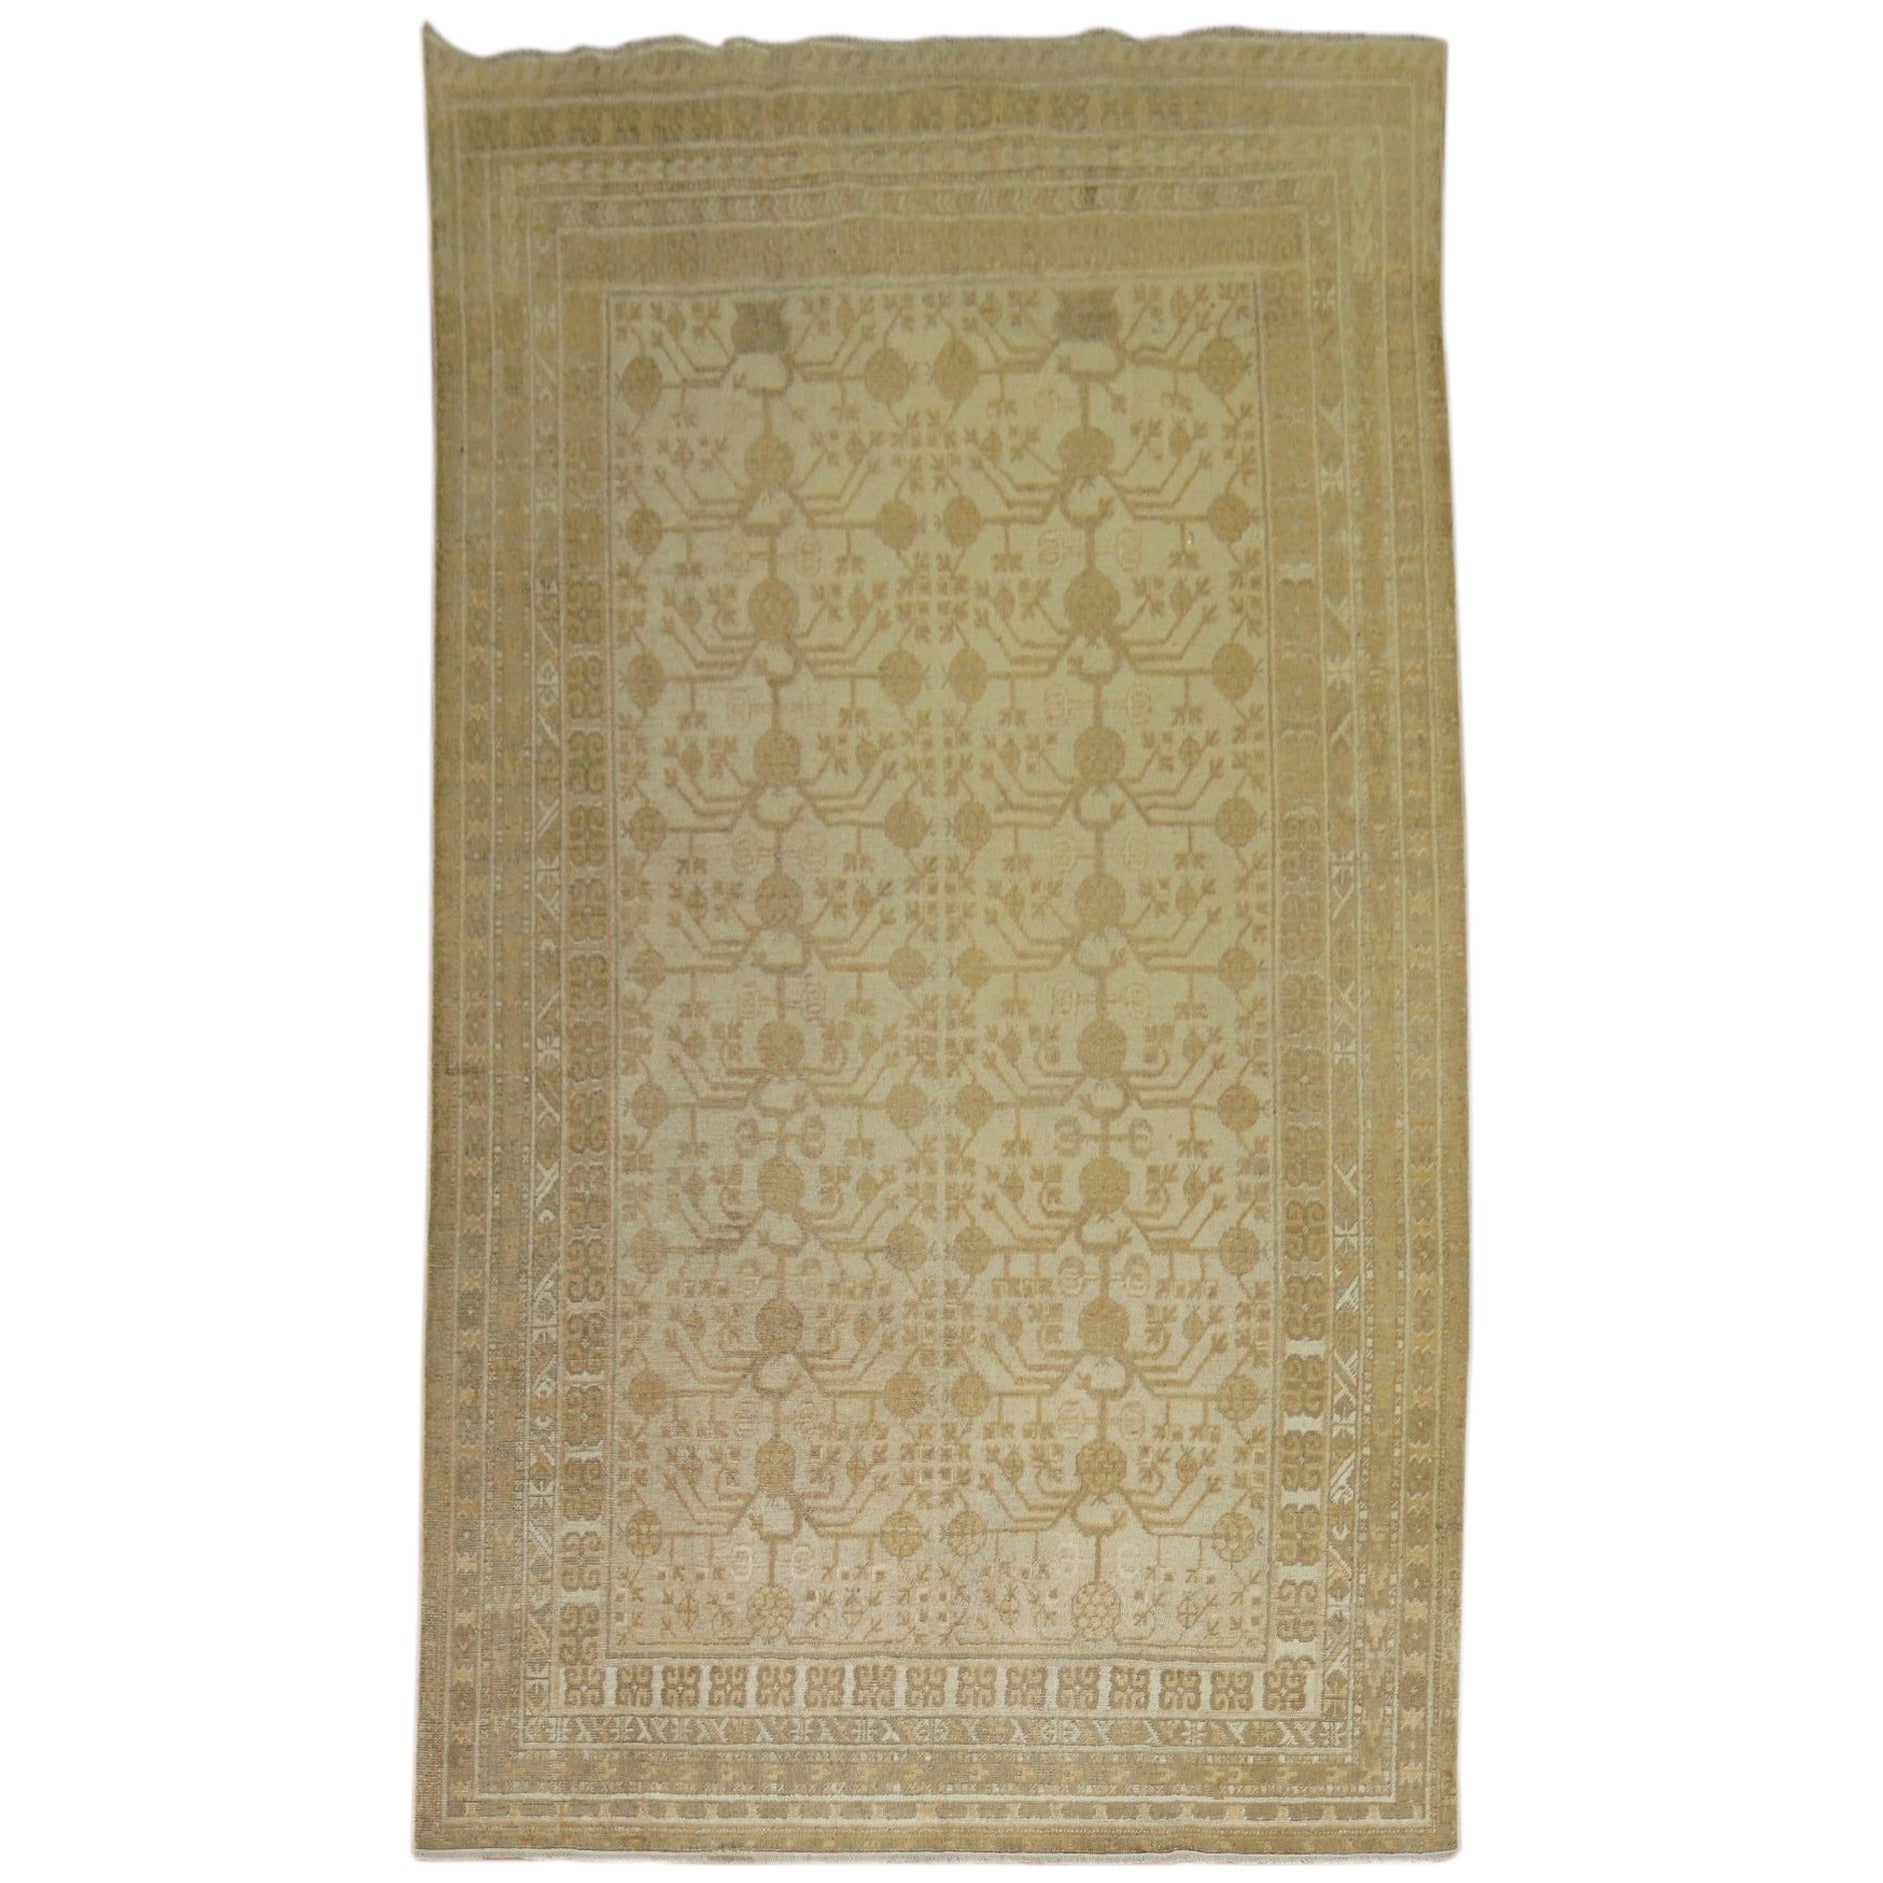 Colonial Revival Central Asian Rugs